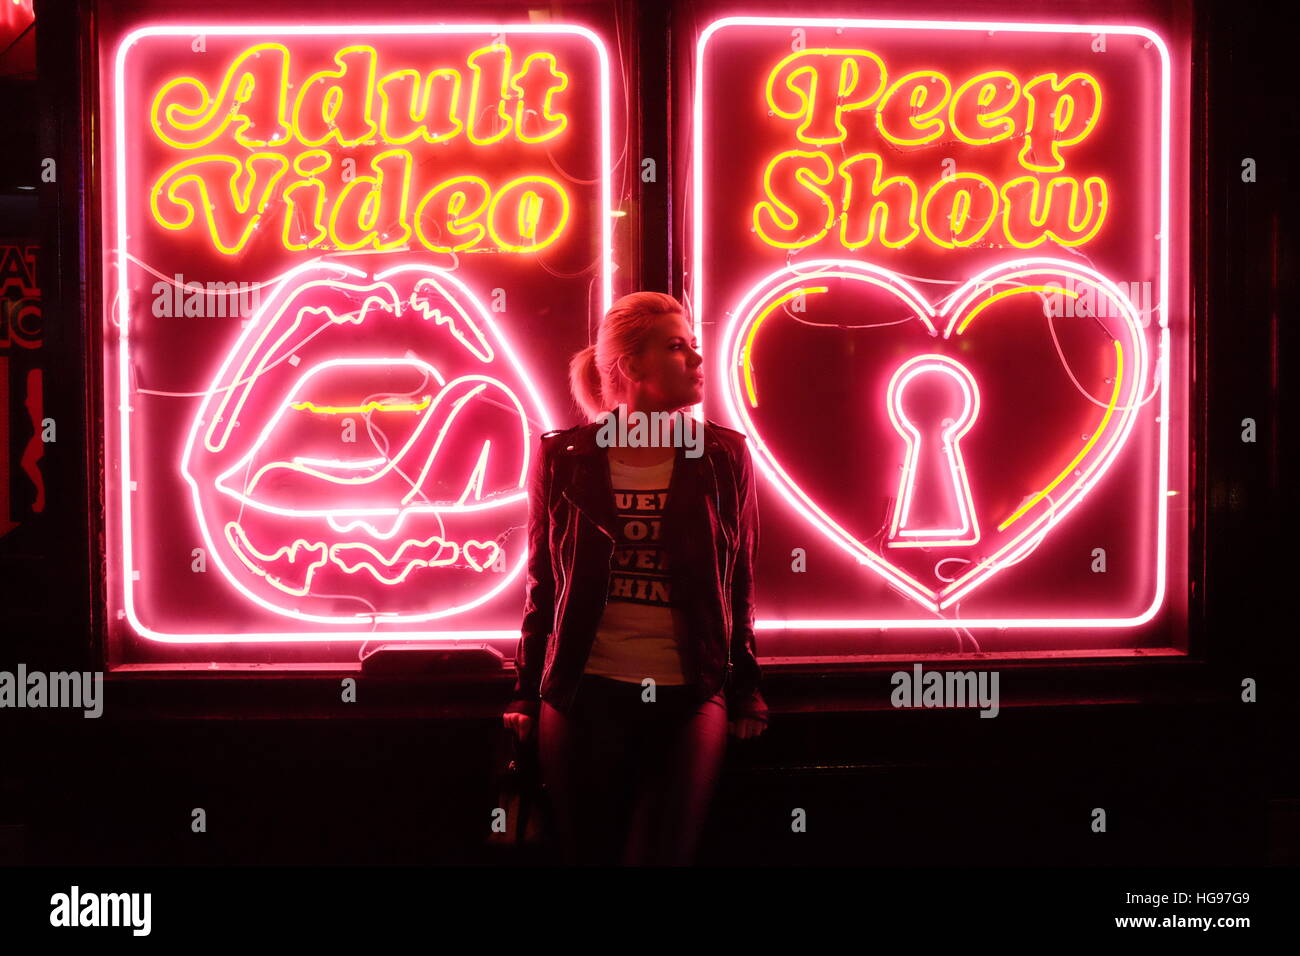 Blonde model poses in front of neon signs in London's famous Soho area. Stock Photo